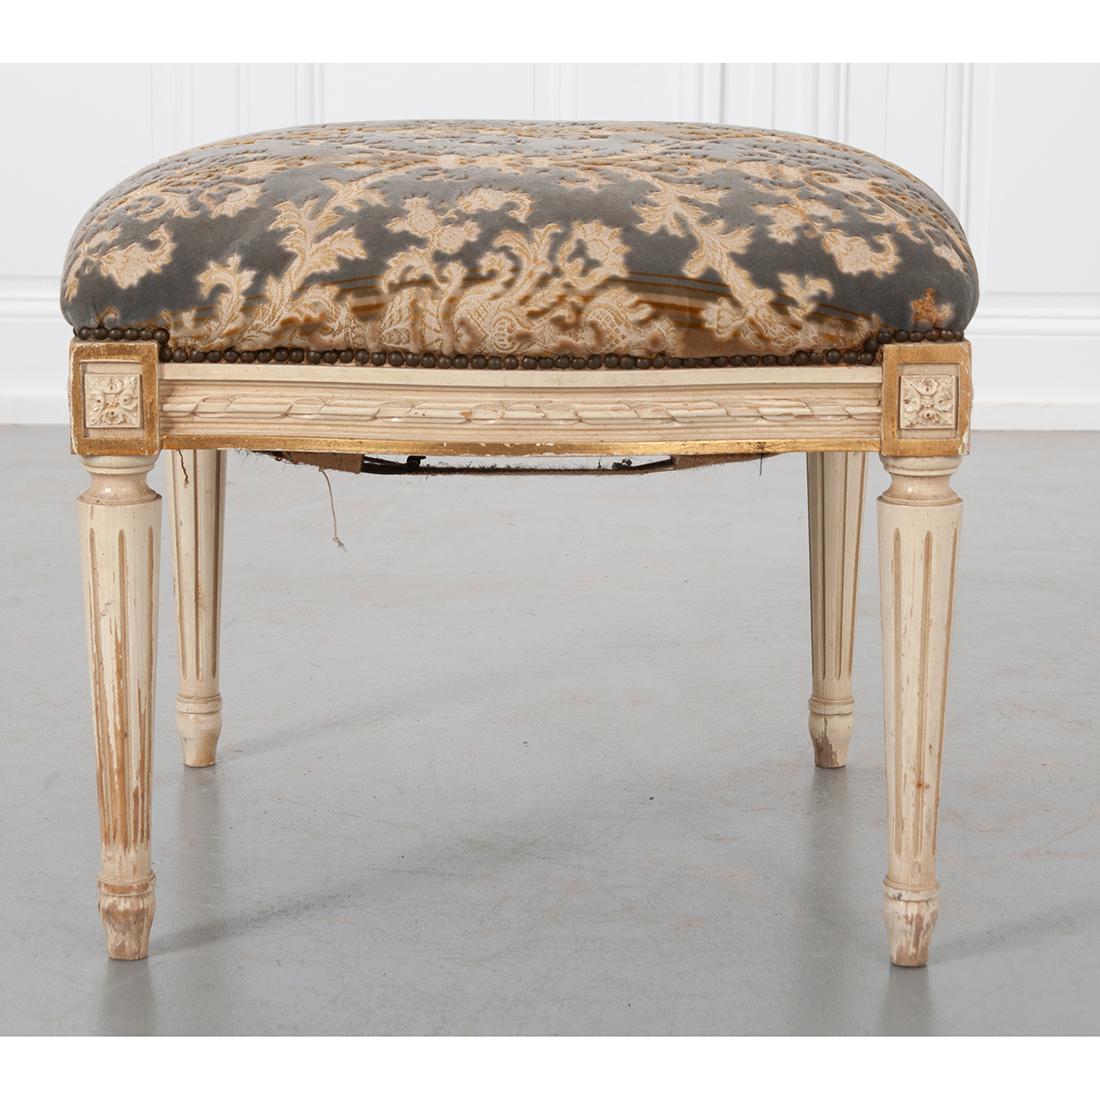 A charming, antique European stool. The cut velvet upholstery cushion has nailhead trim and sits atop a carved apron with floret dies at the four corners. The whole is raised on fluted, tapering legs. The stool has a soft, quatrefoil shape and is